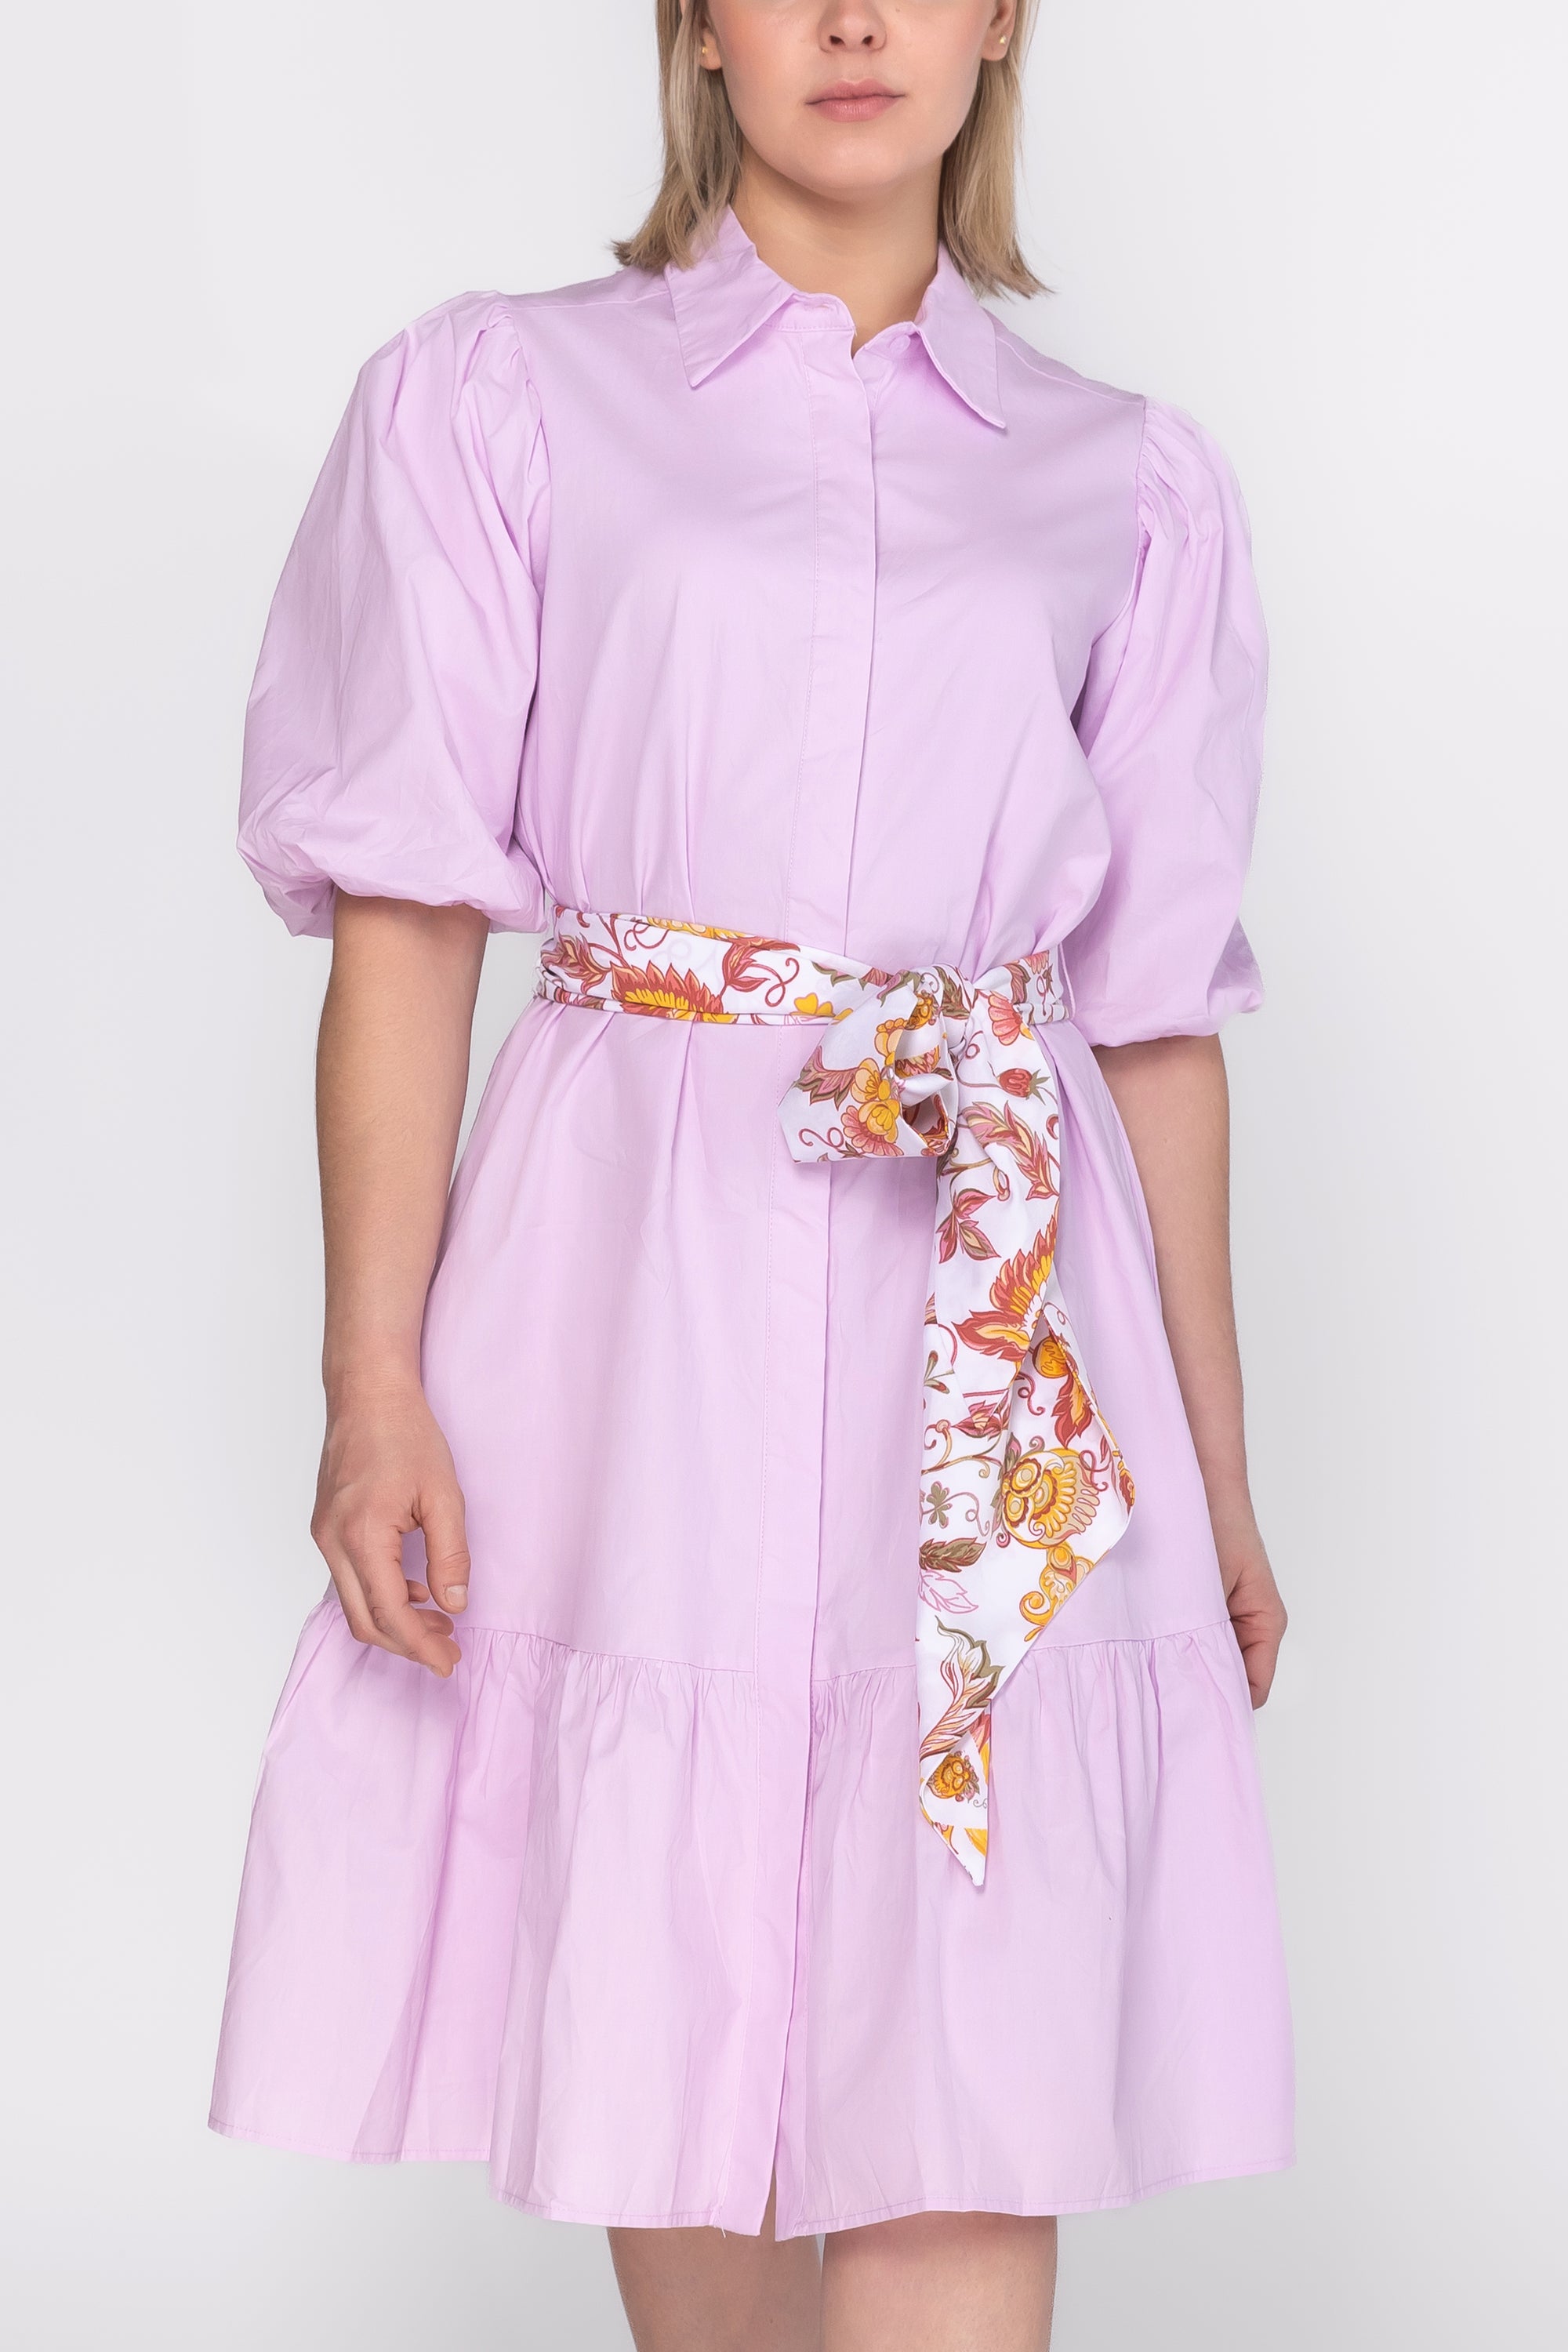 ALLIE DRESS Short Sleeve (LILAC SOLID) 41&quot;